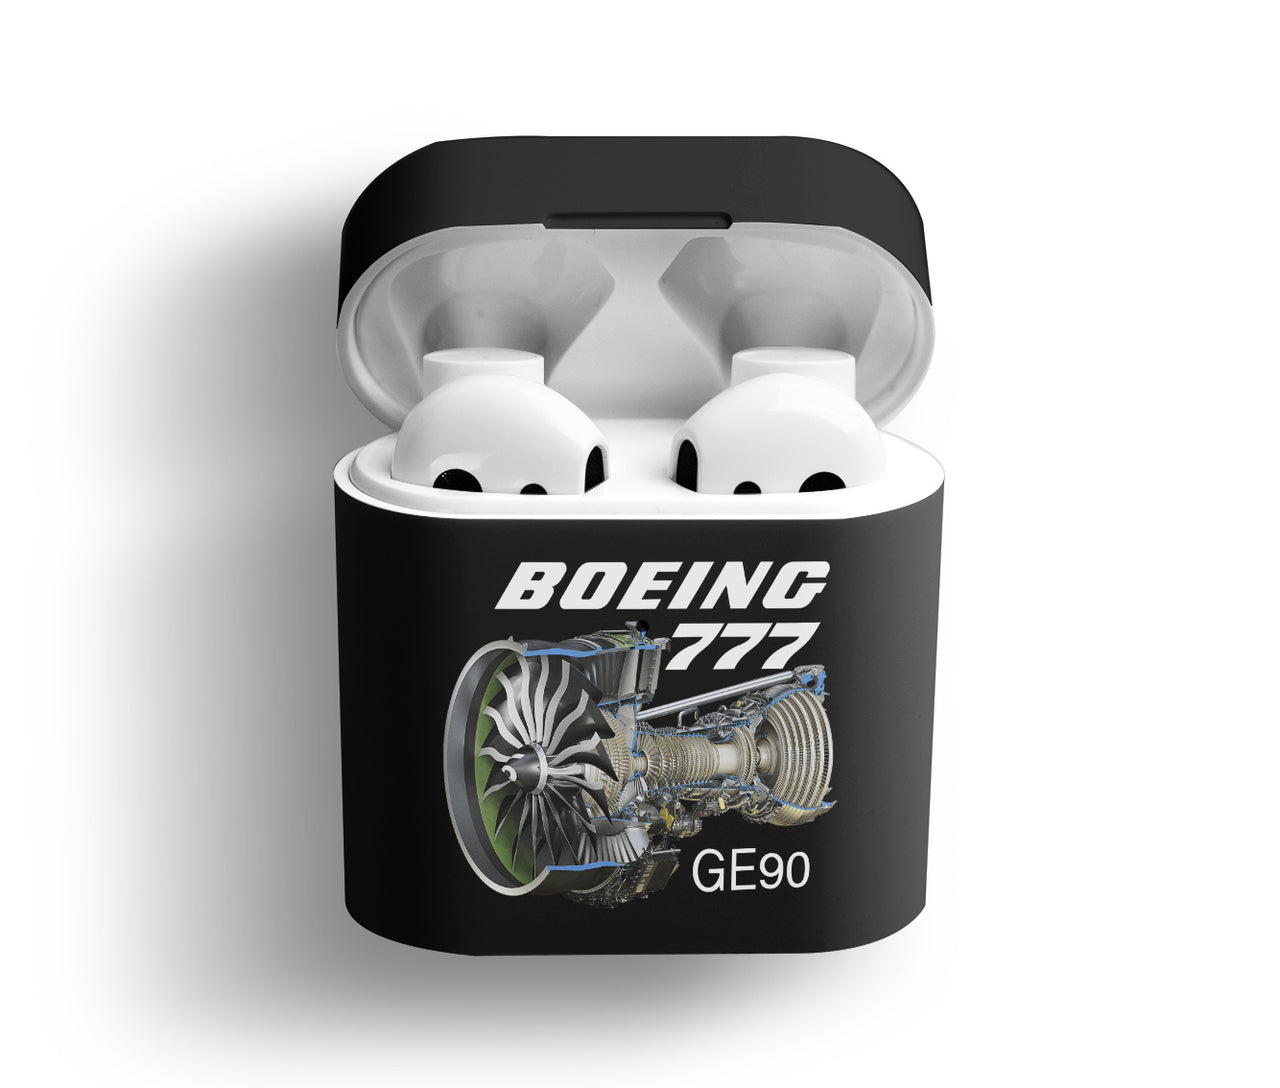 Boeing 777 & GE90 Engine Designed AirPods Cases